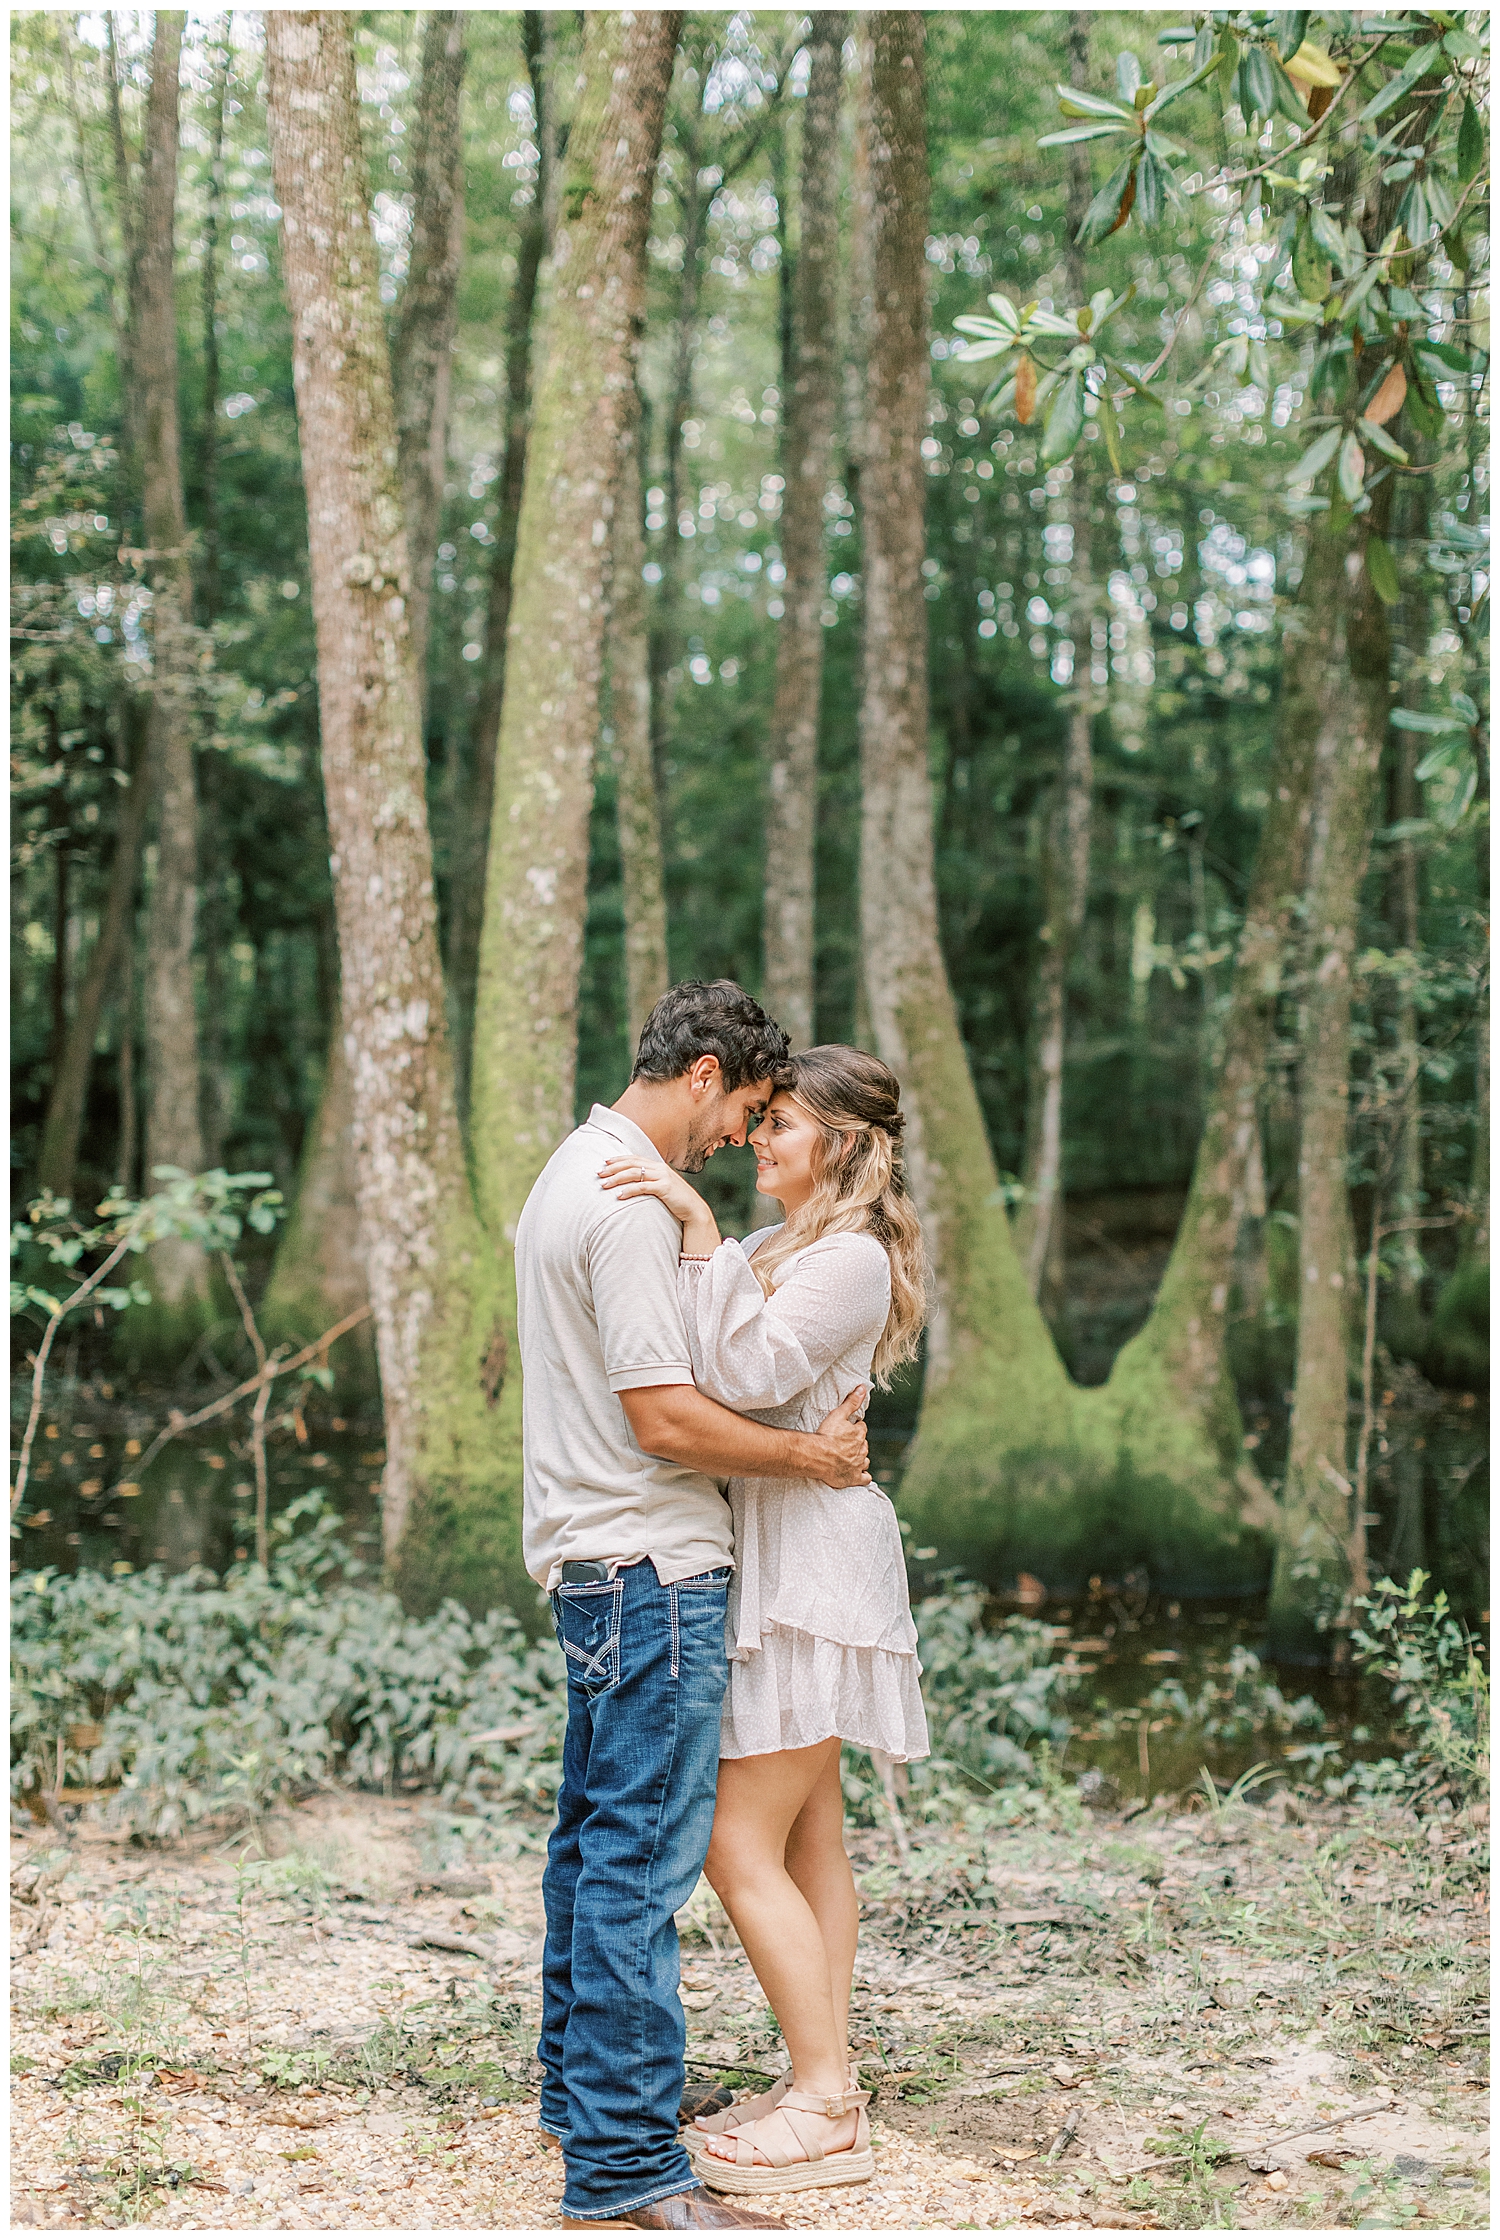 Cypress trees surround the couple.